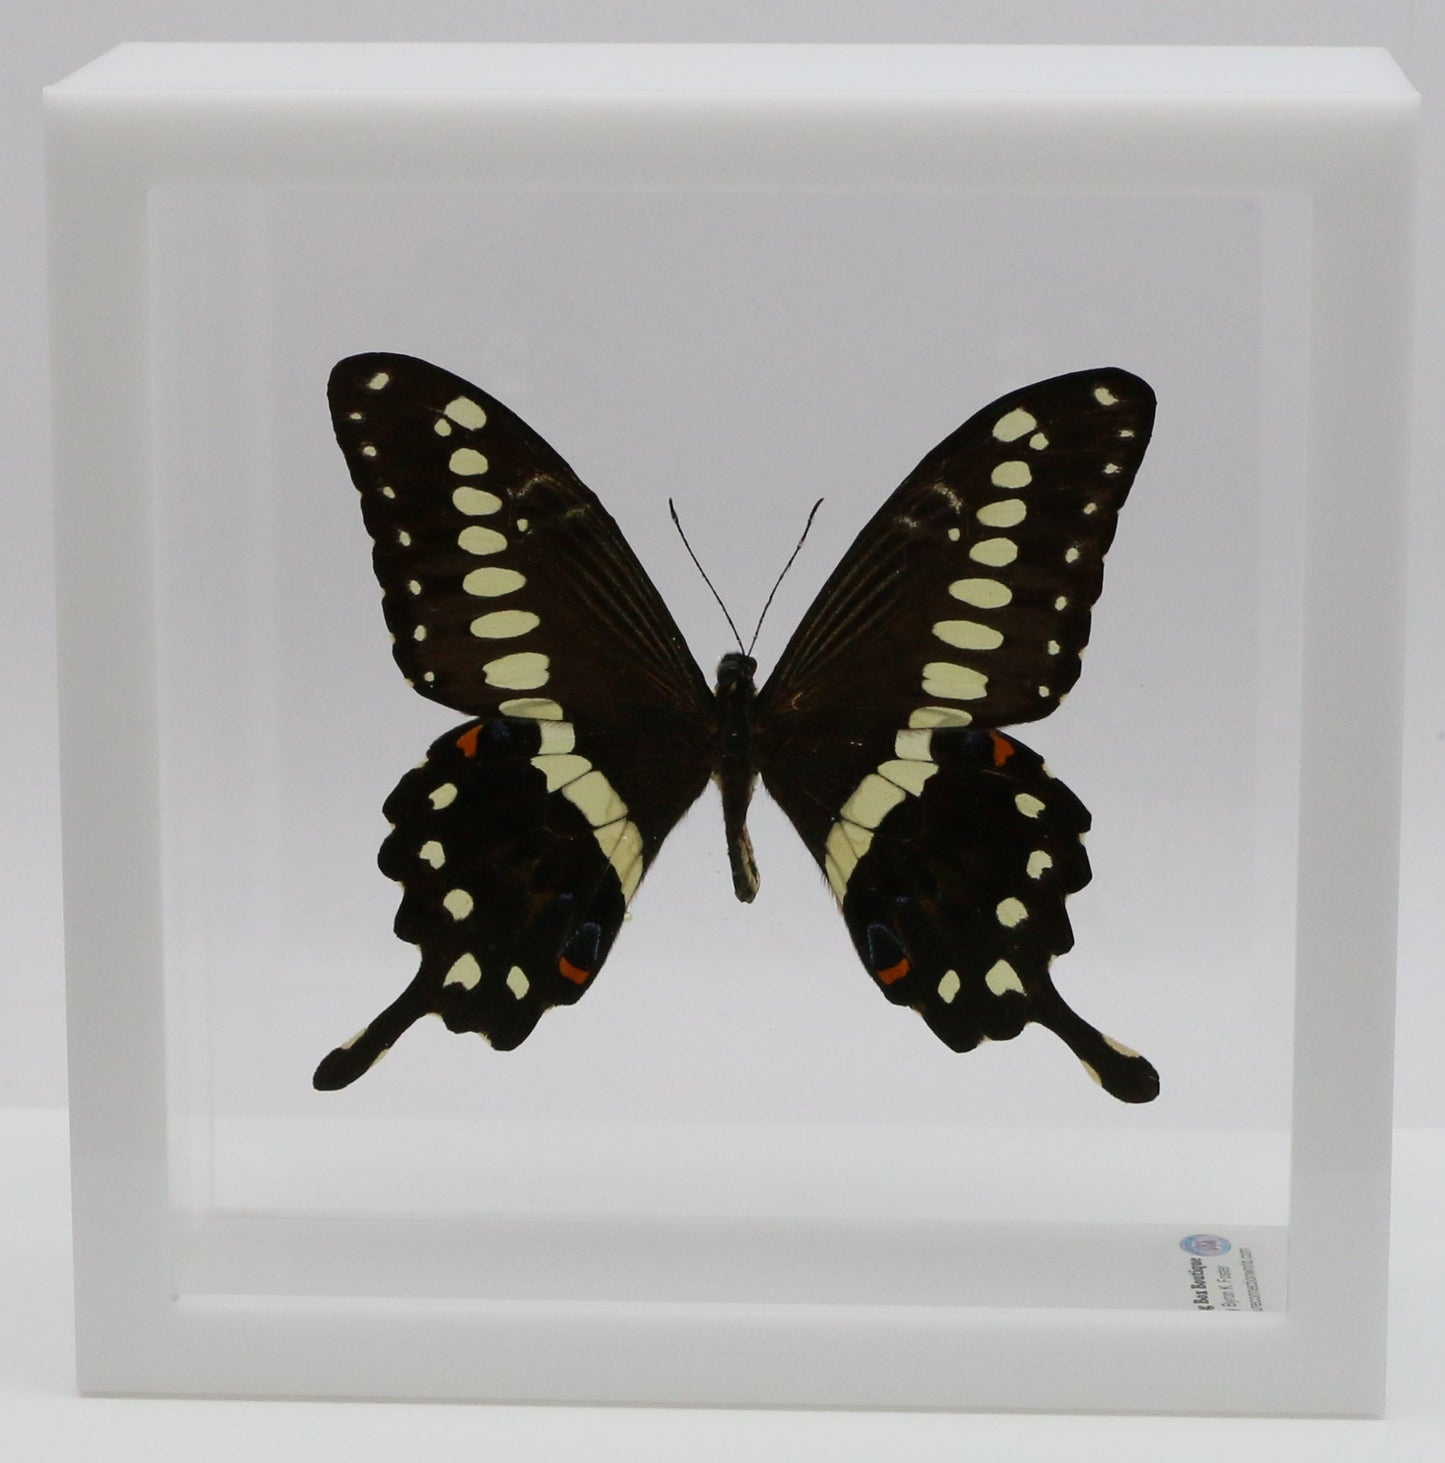 9060617 - Real Butterfly Acrylic Display Box - 6" X 6" - African Giant Swallowtail (Papilio lormieri)